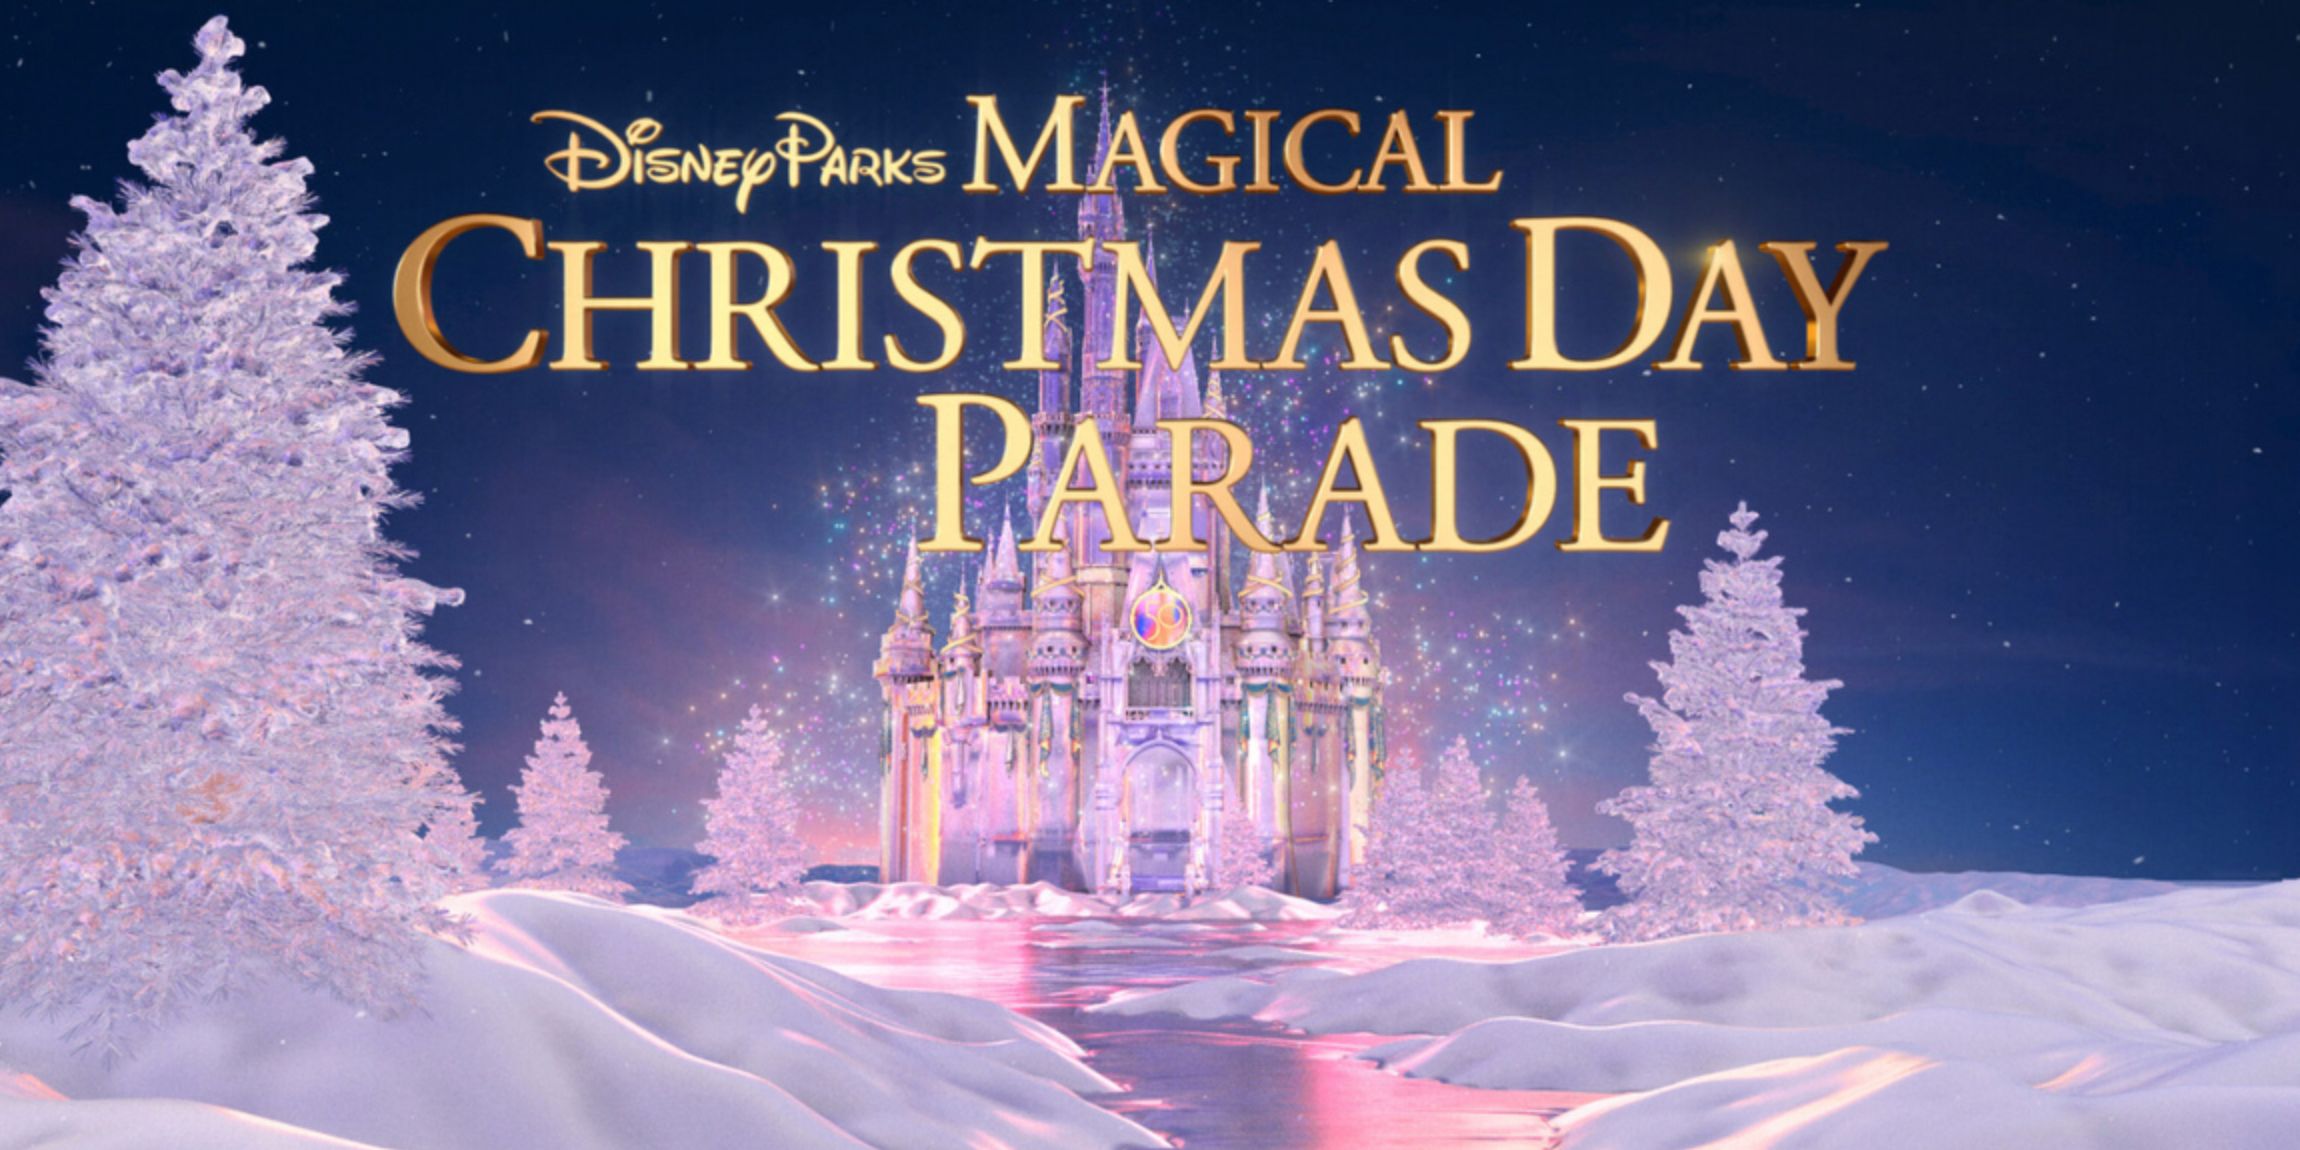 The title card for the Disney Parks Christmas Day parde features a castle made from ice and a path made of snow